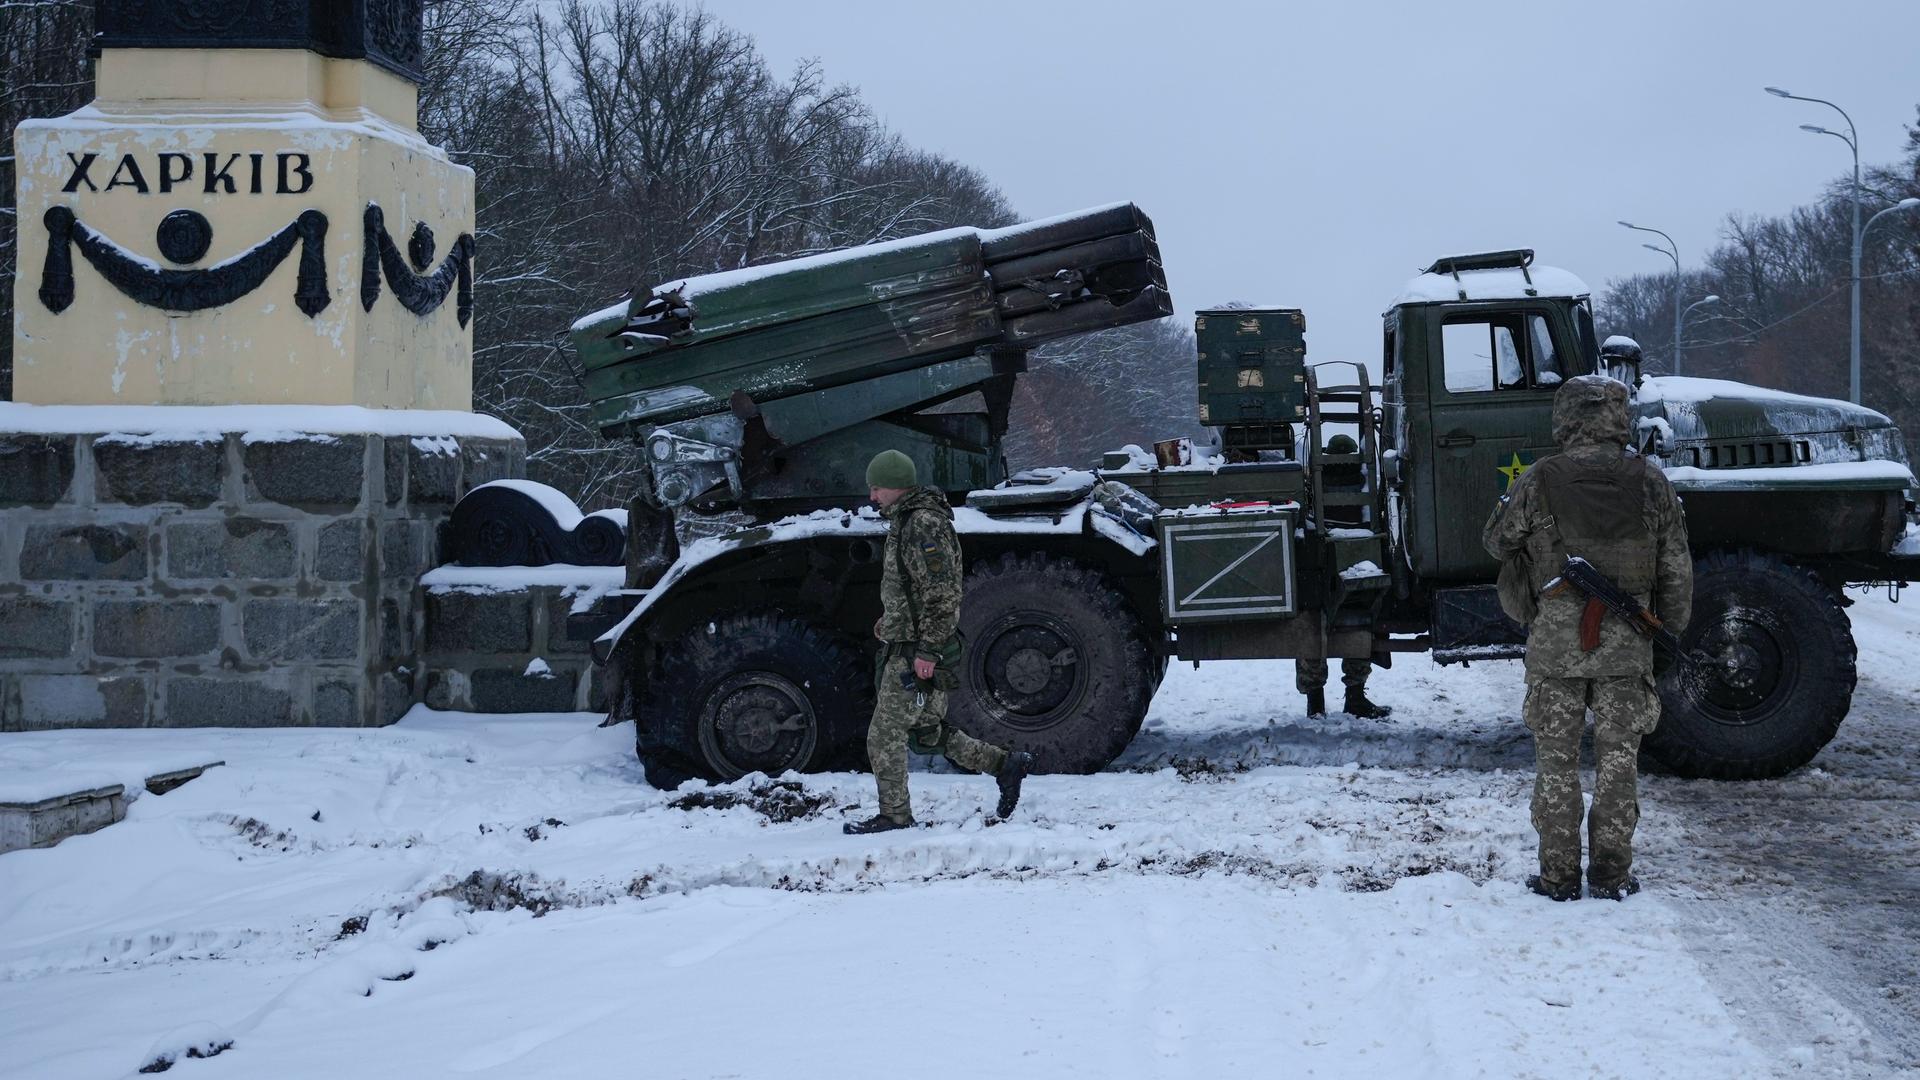 Ukrainian servicemen walk by a deactivated Russian military multiple rocket launcher on the outskirts of Kharkiv, Ukraine, Feb. 25, 2022. Russian troops bore down on Ukraine's capital Friday, with gunfire and explosions resonating ever closer to the gover